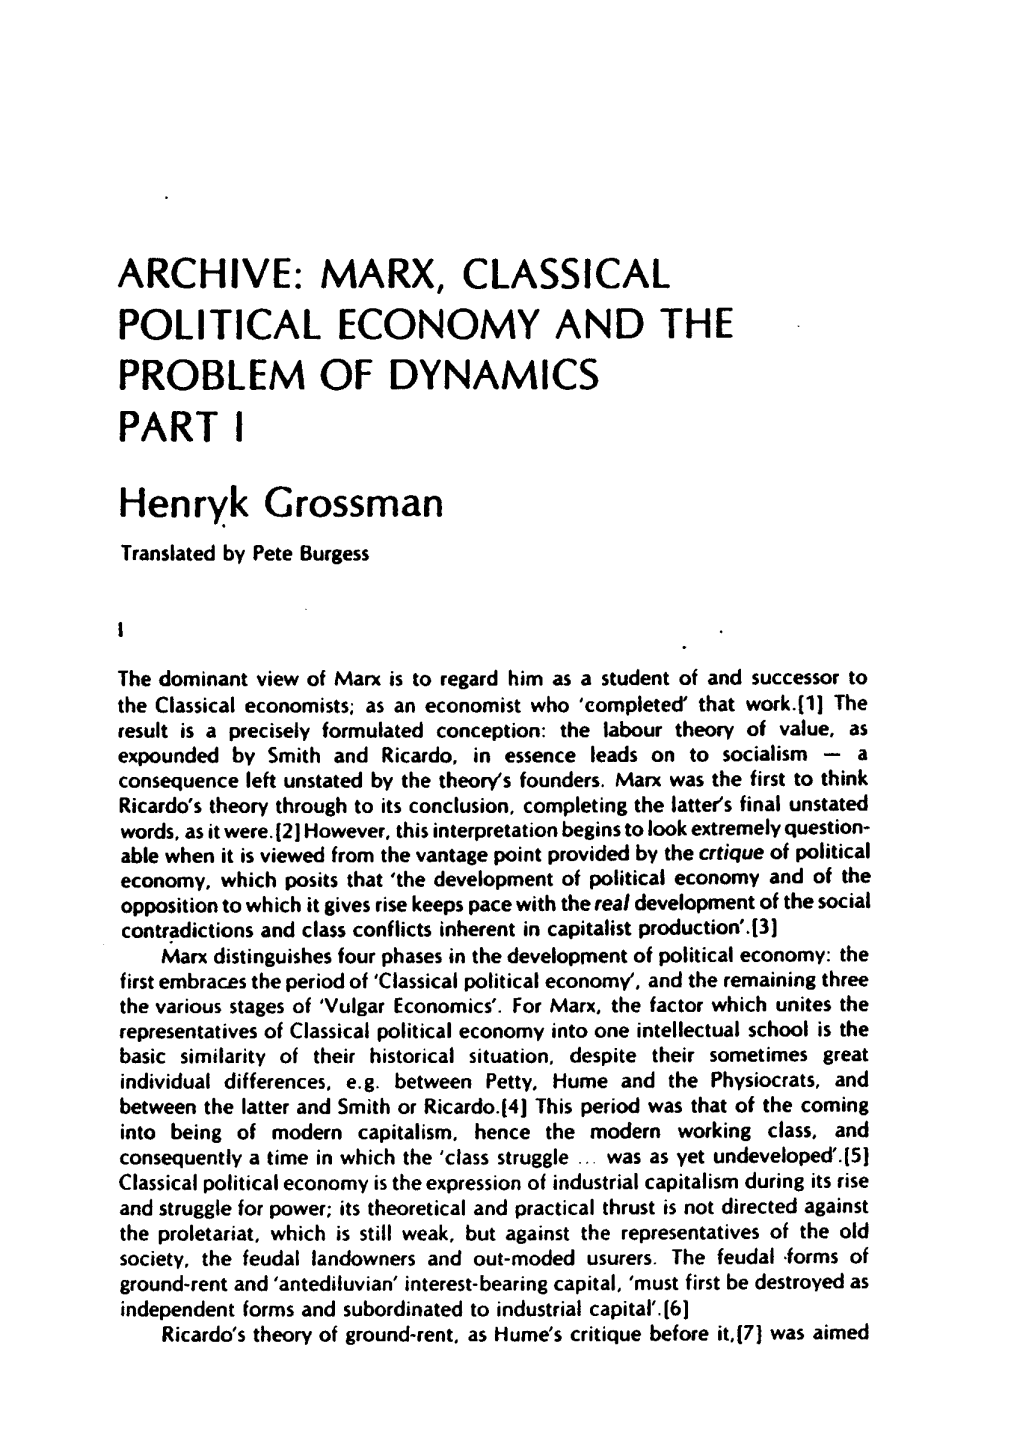 Marx, Classical Political Economy and the Problem of Dynamics Part I